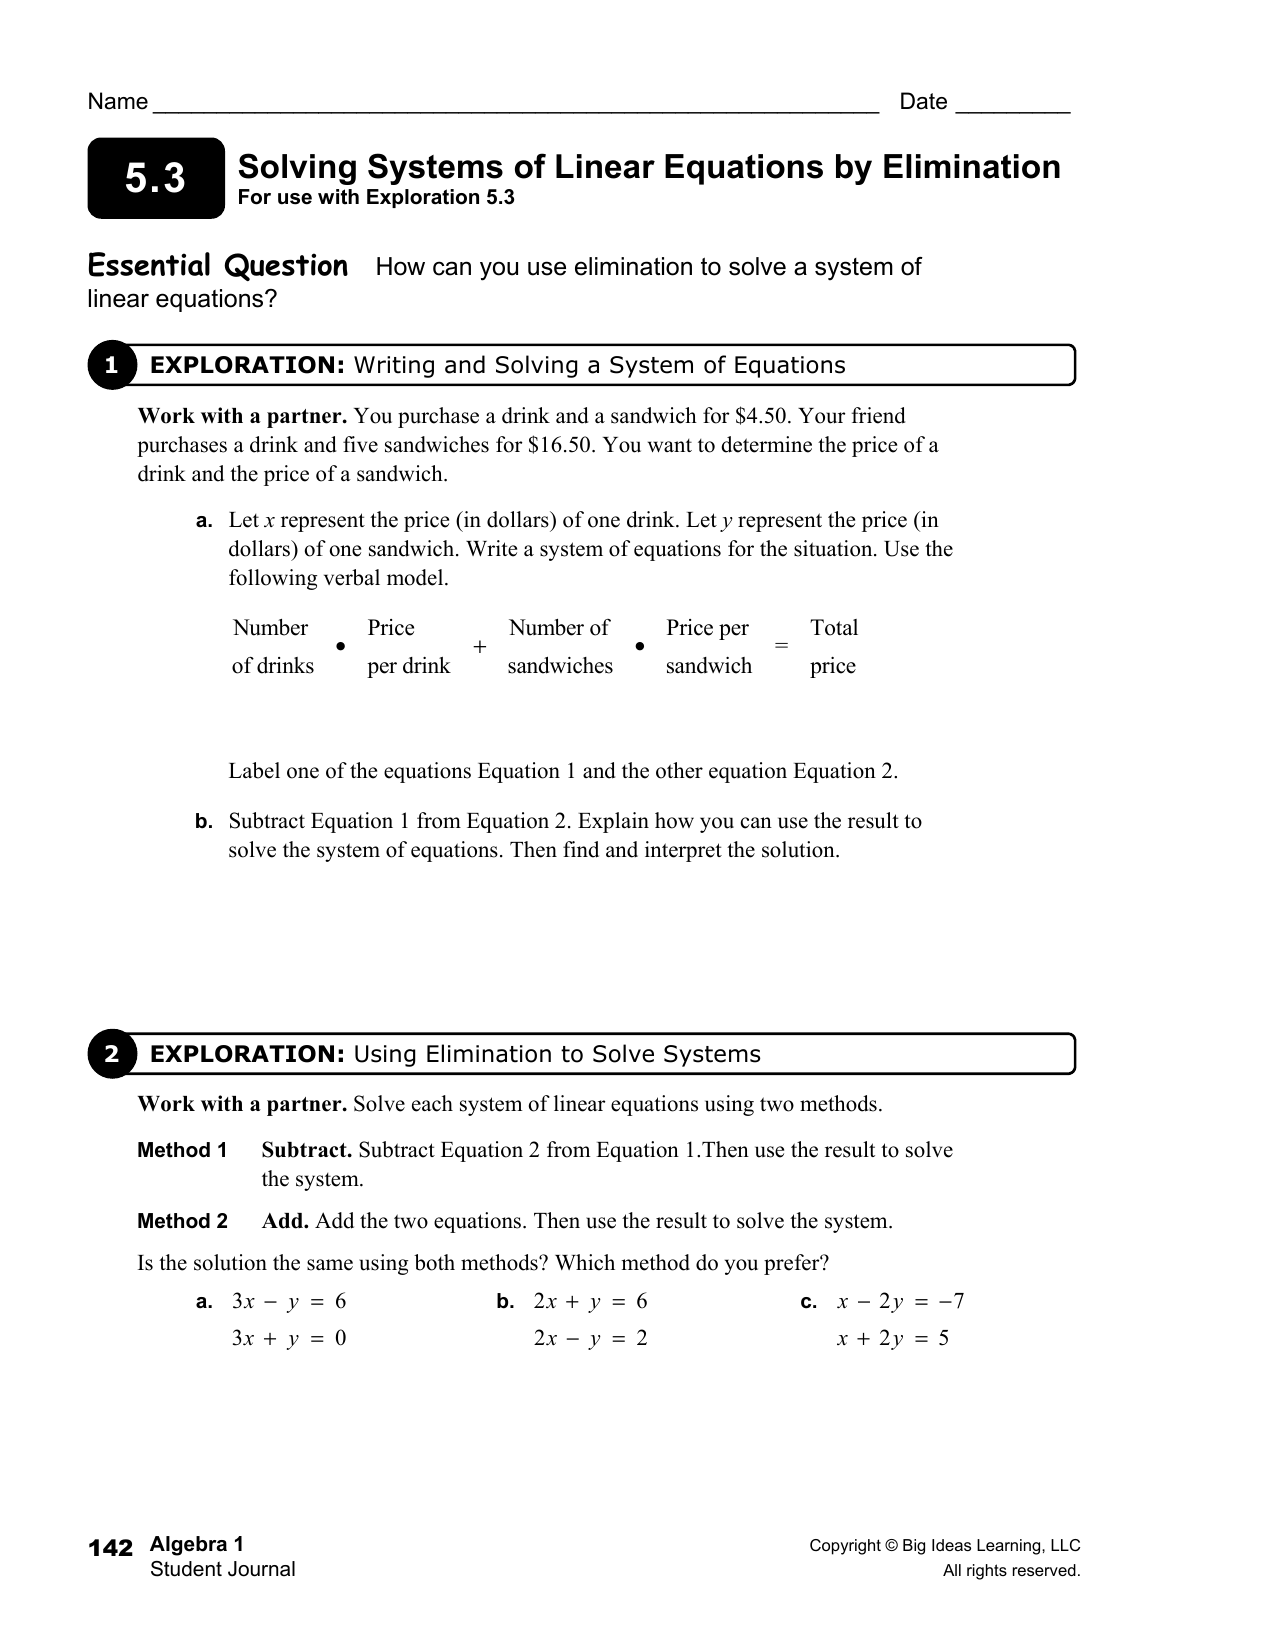 5.3 solving systems of linear equations by elimination